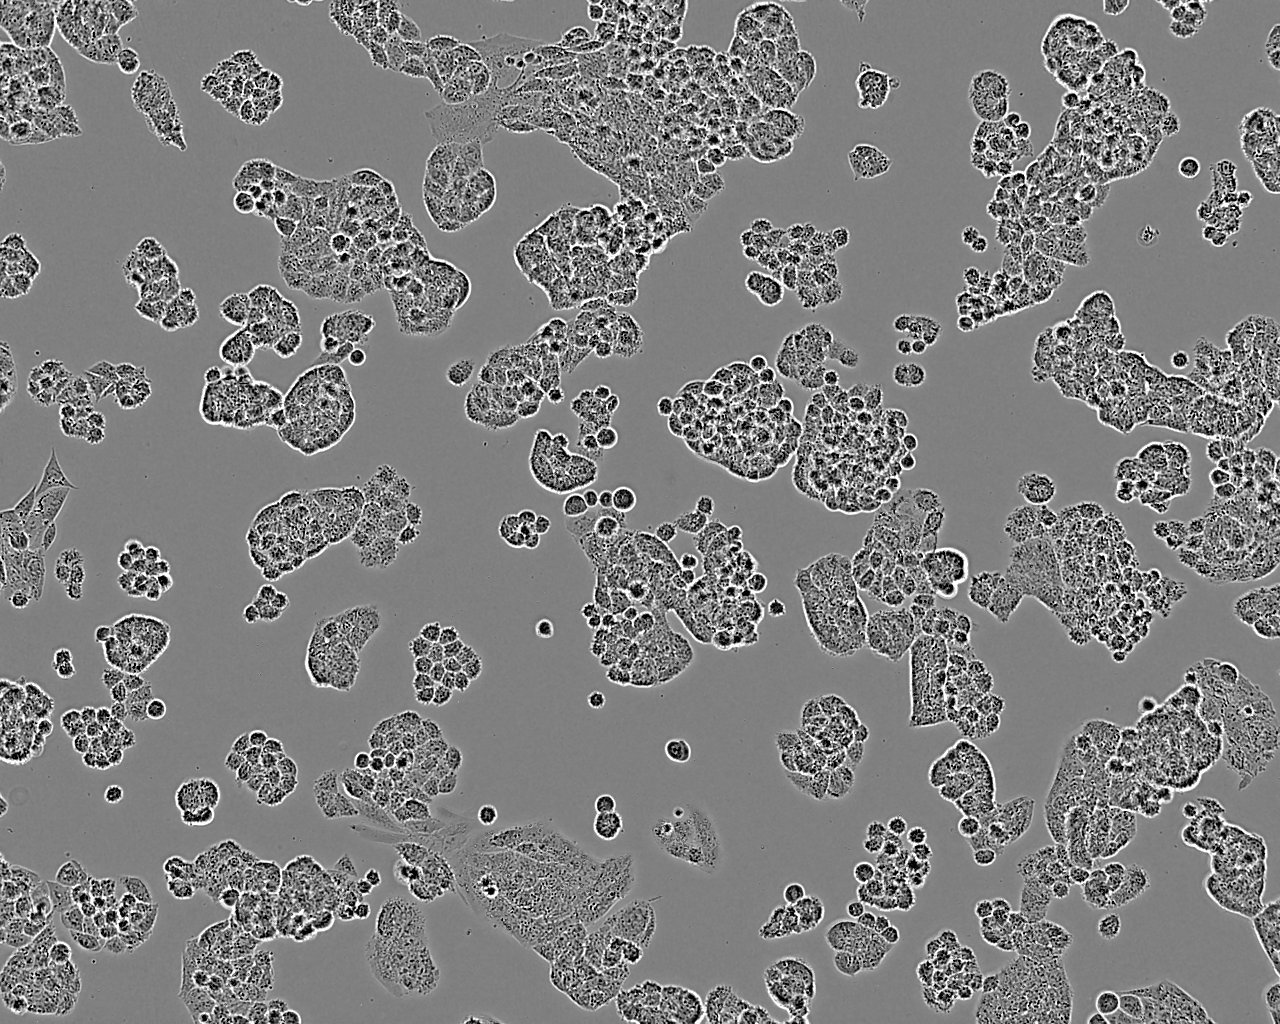 A2780 Cell Line. 48 hours post plating. Image courtesy of the European Collection of Authenticated Cell Cultures (ECACC).